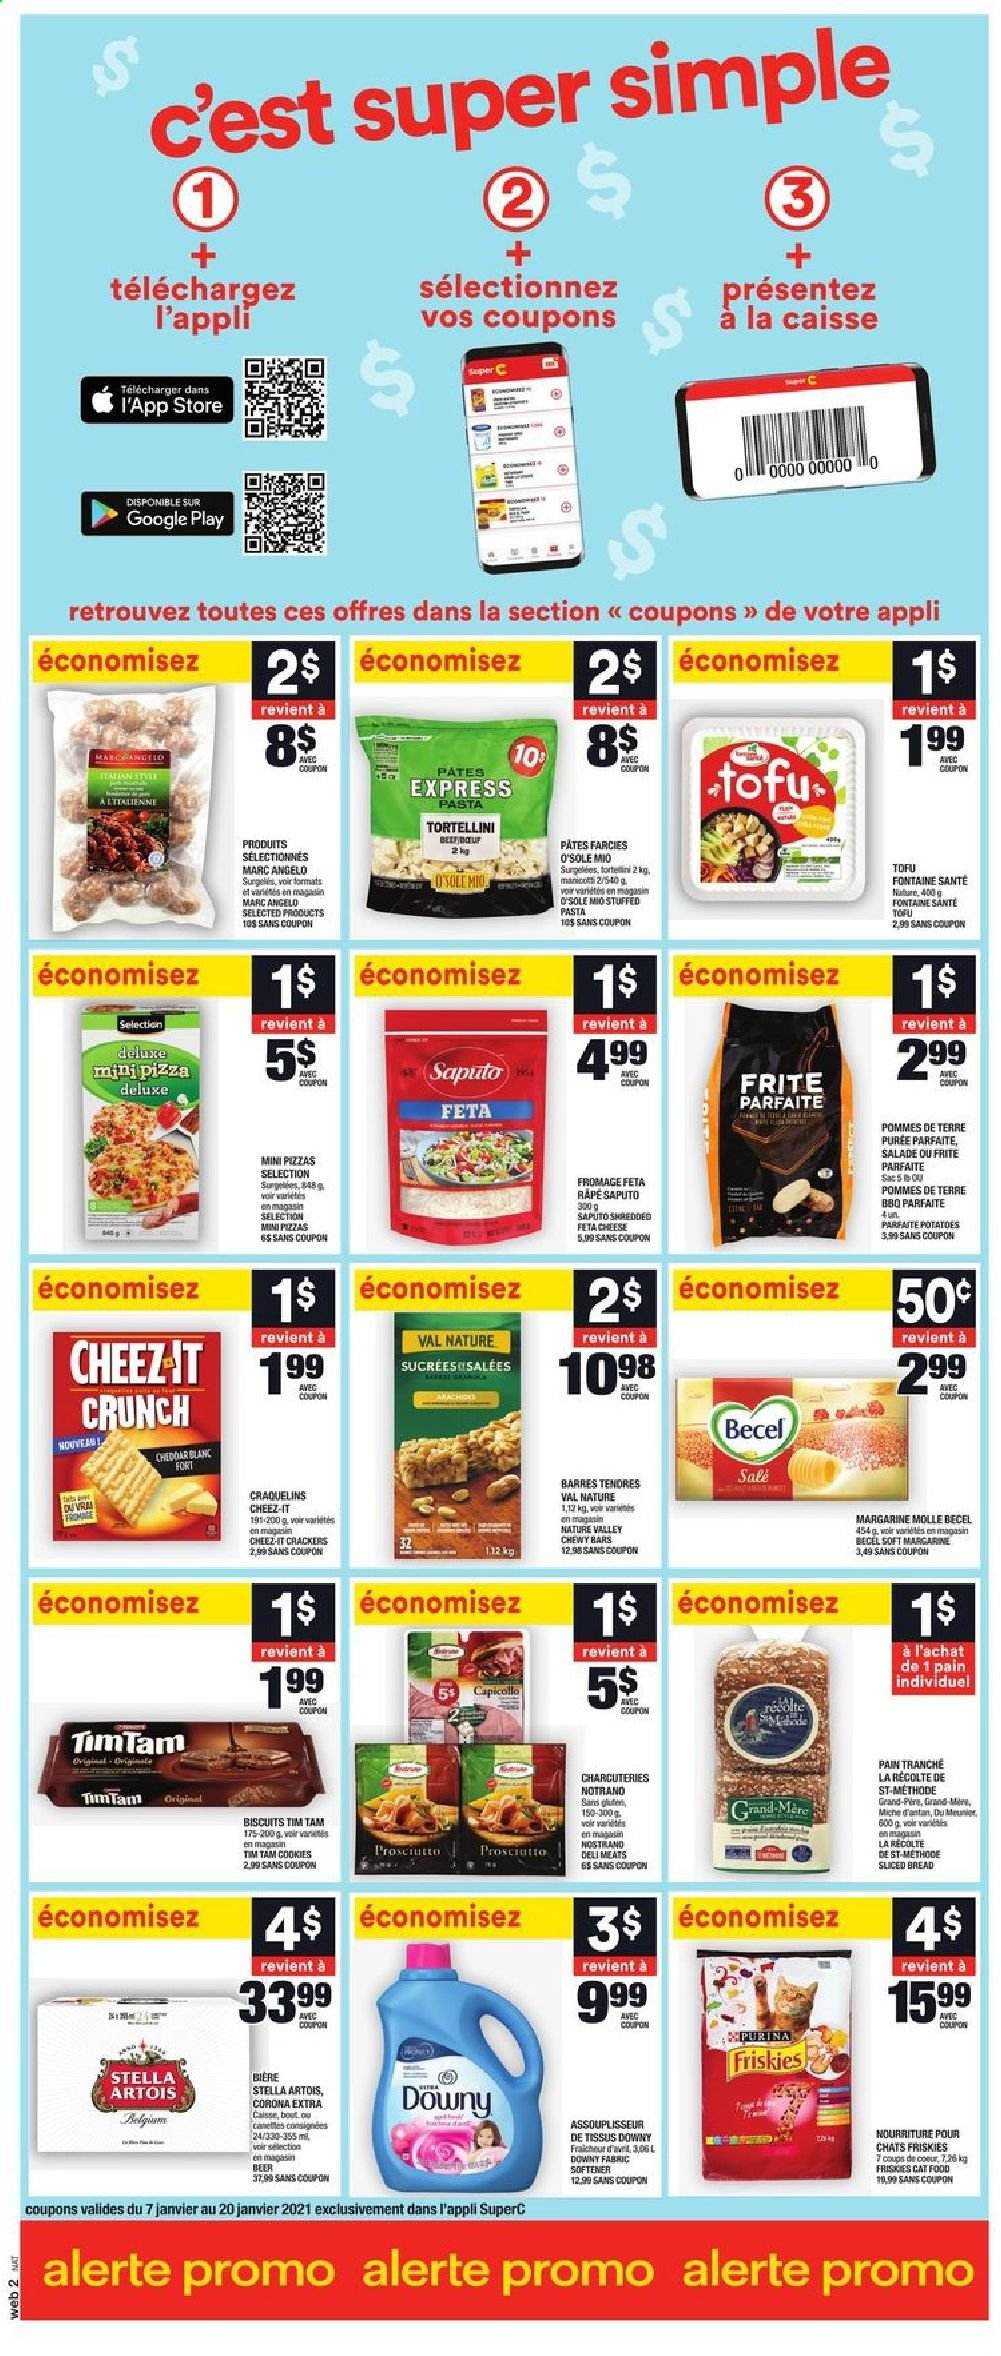 thumbnail - Super C Flyer - January 14, 2021 - January 20, 2021 - Sales products - bread, potatoes, pizza, pasta, tortellini, prosciutto, feta, tofu, margarine, crackers, Tim Tam, biscuit, Cheez-It, Nature Valley, beer, Stella Artois, Corona Extra, fabric softener, Downy Laundry. Page 10.